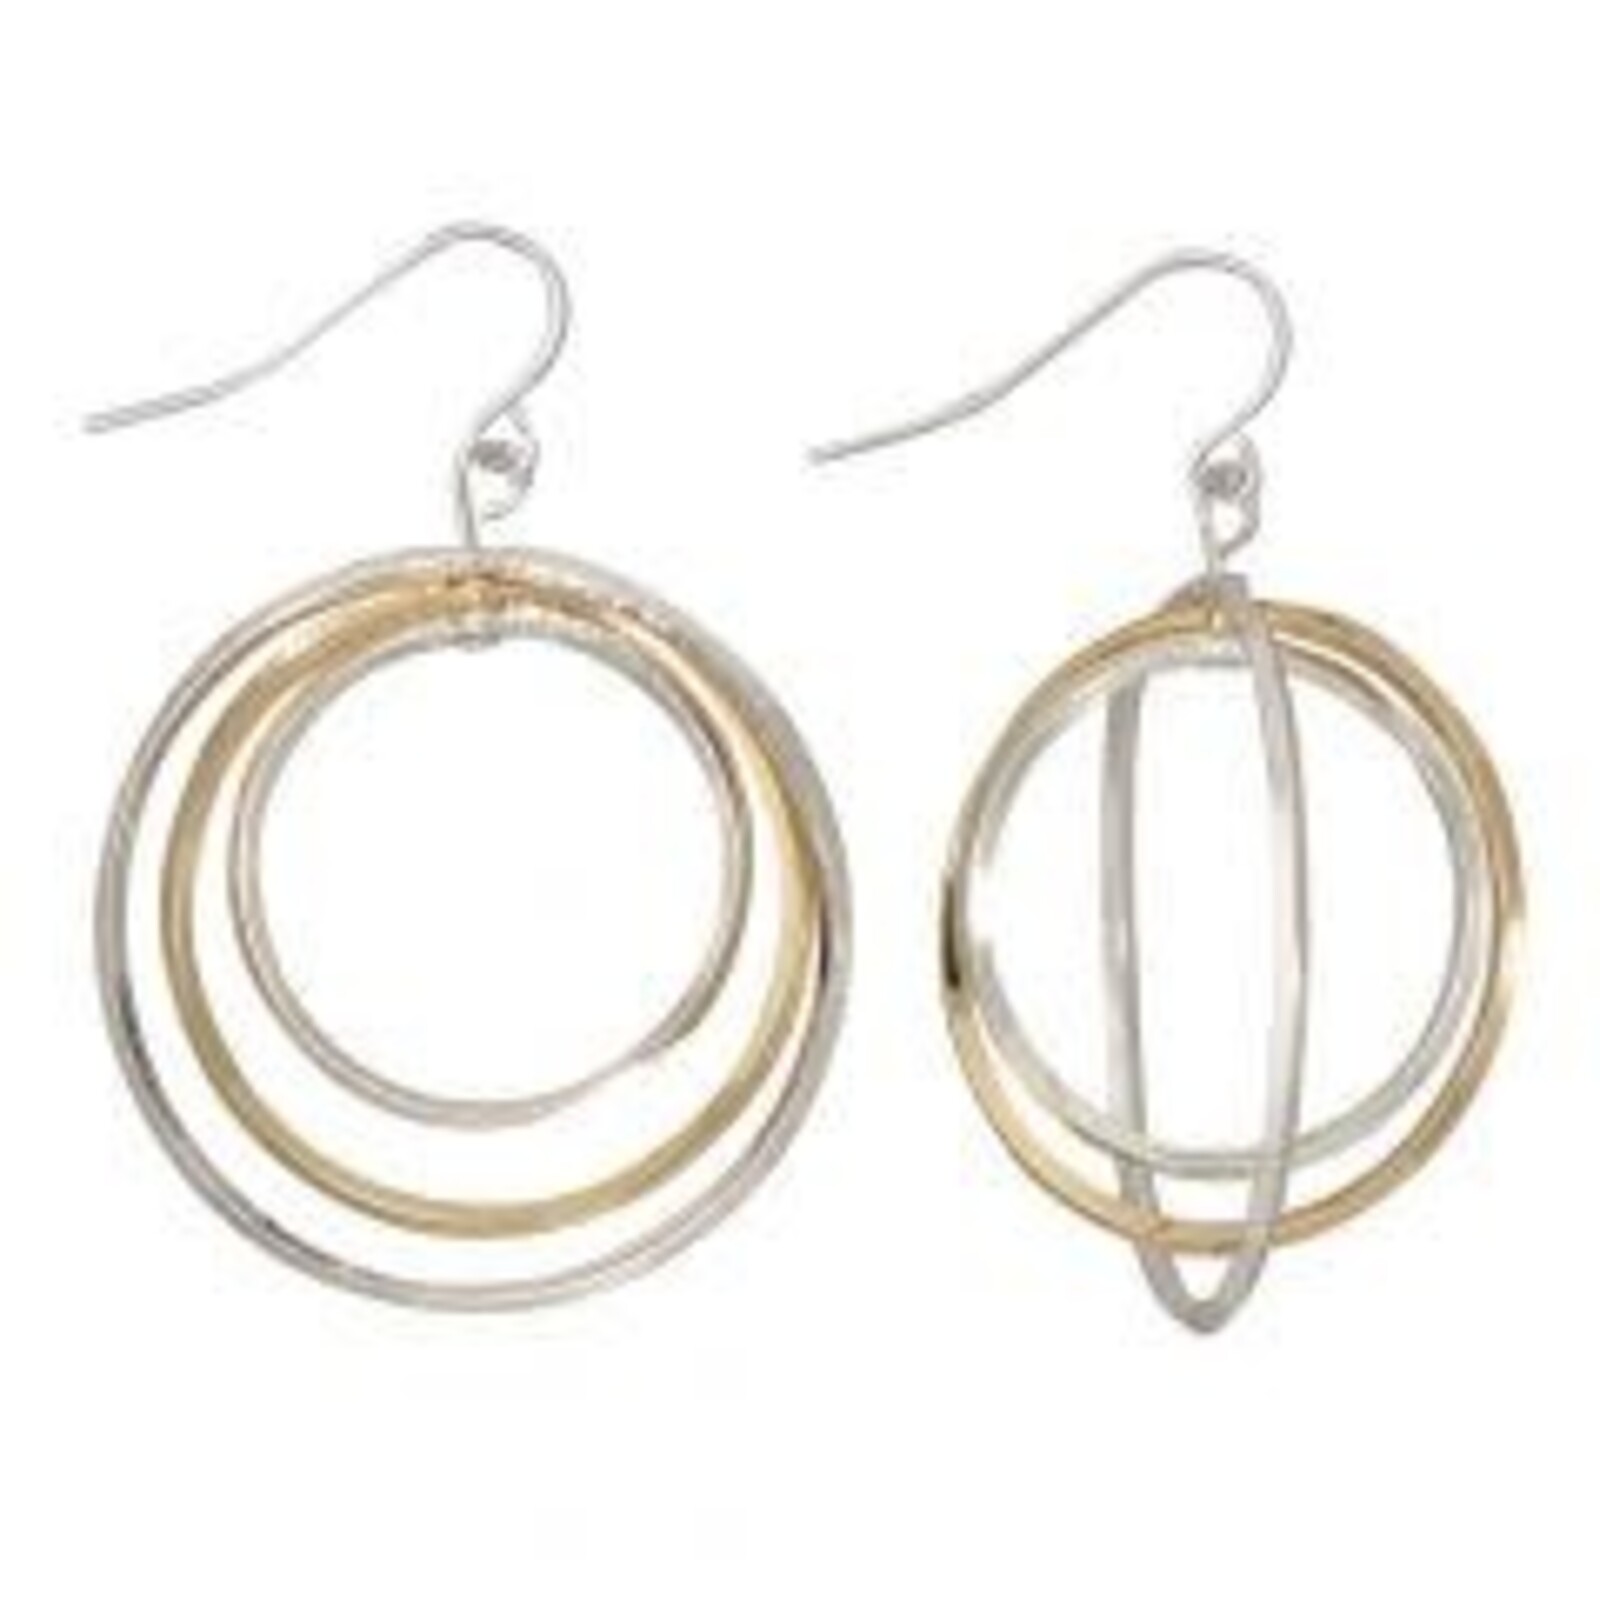 Periwinkle by Barlow Earrings-Two Tone Circles 8108857 loading=